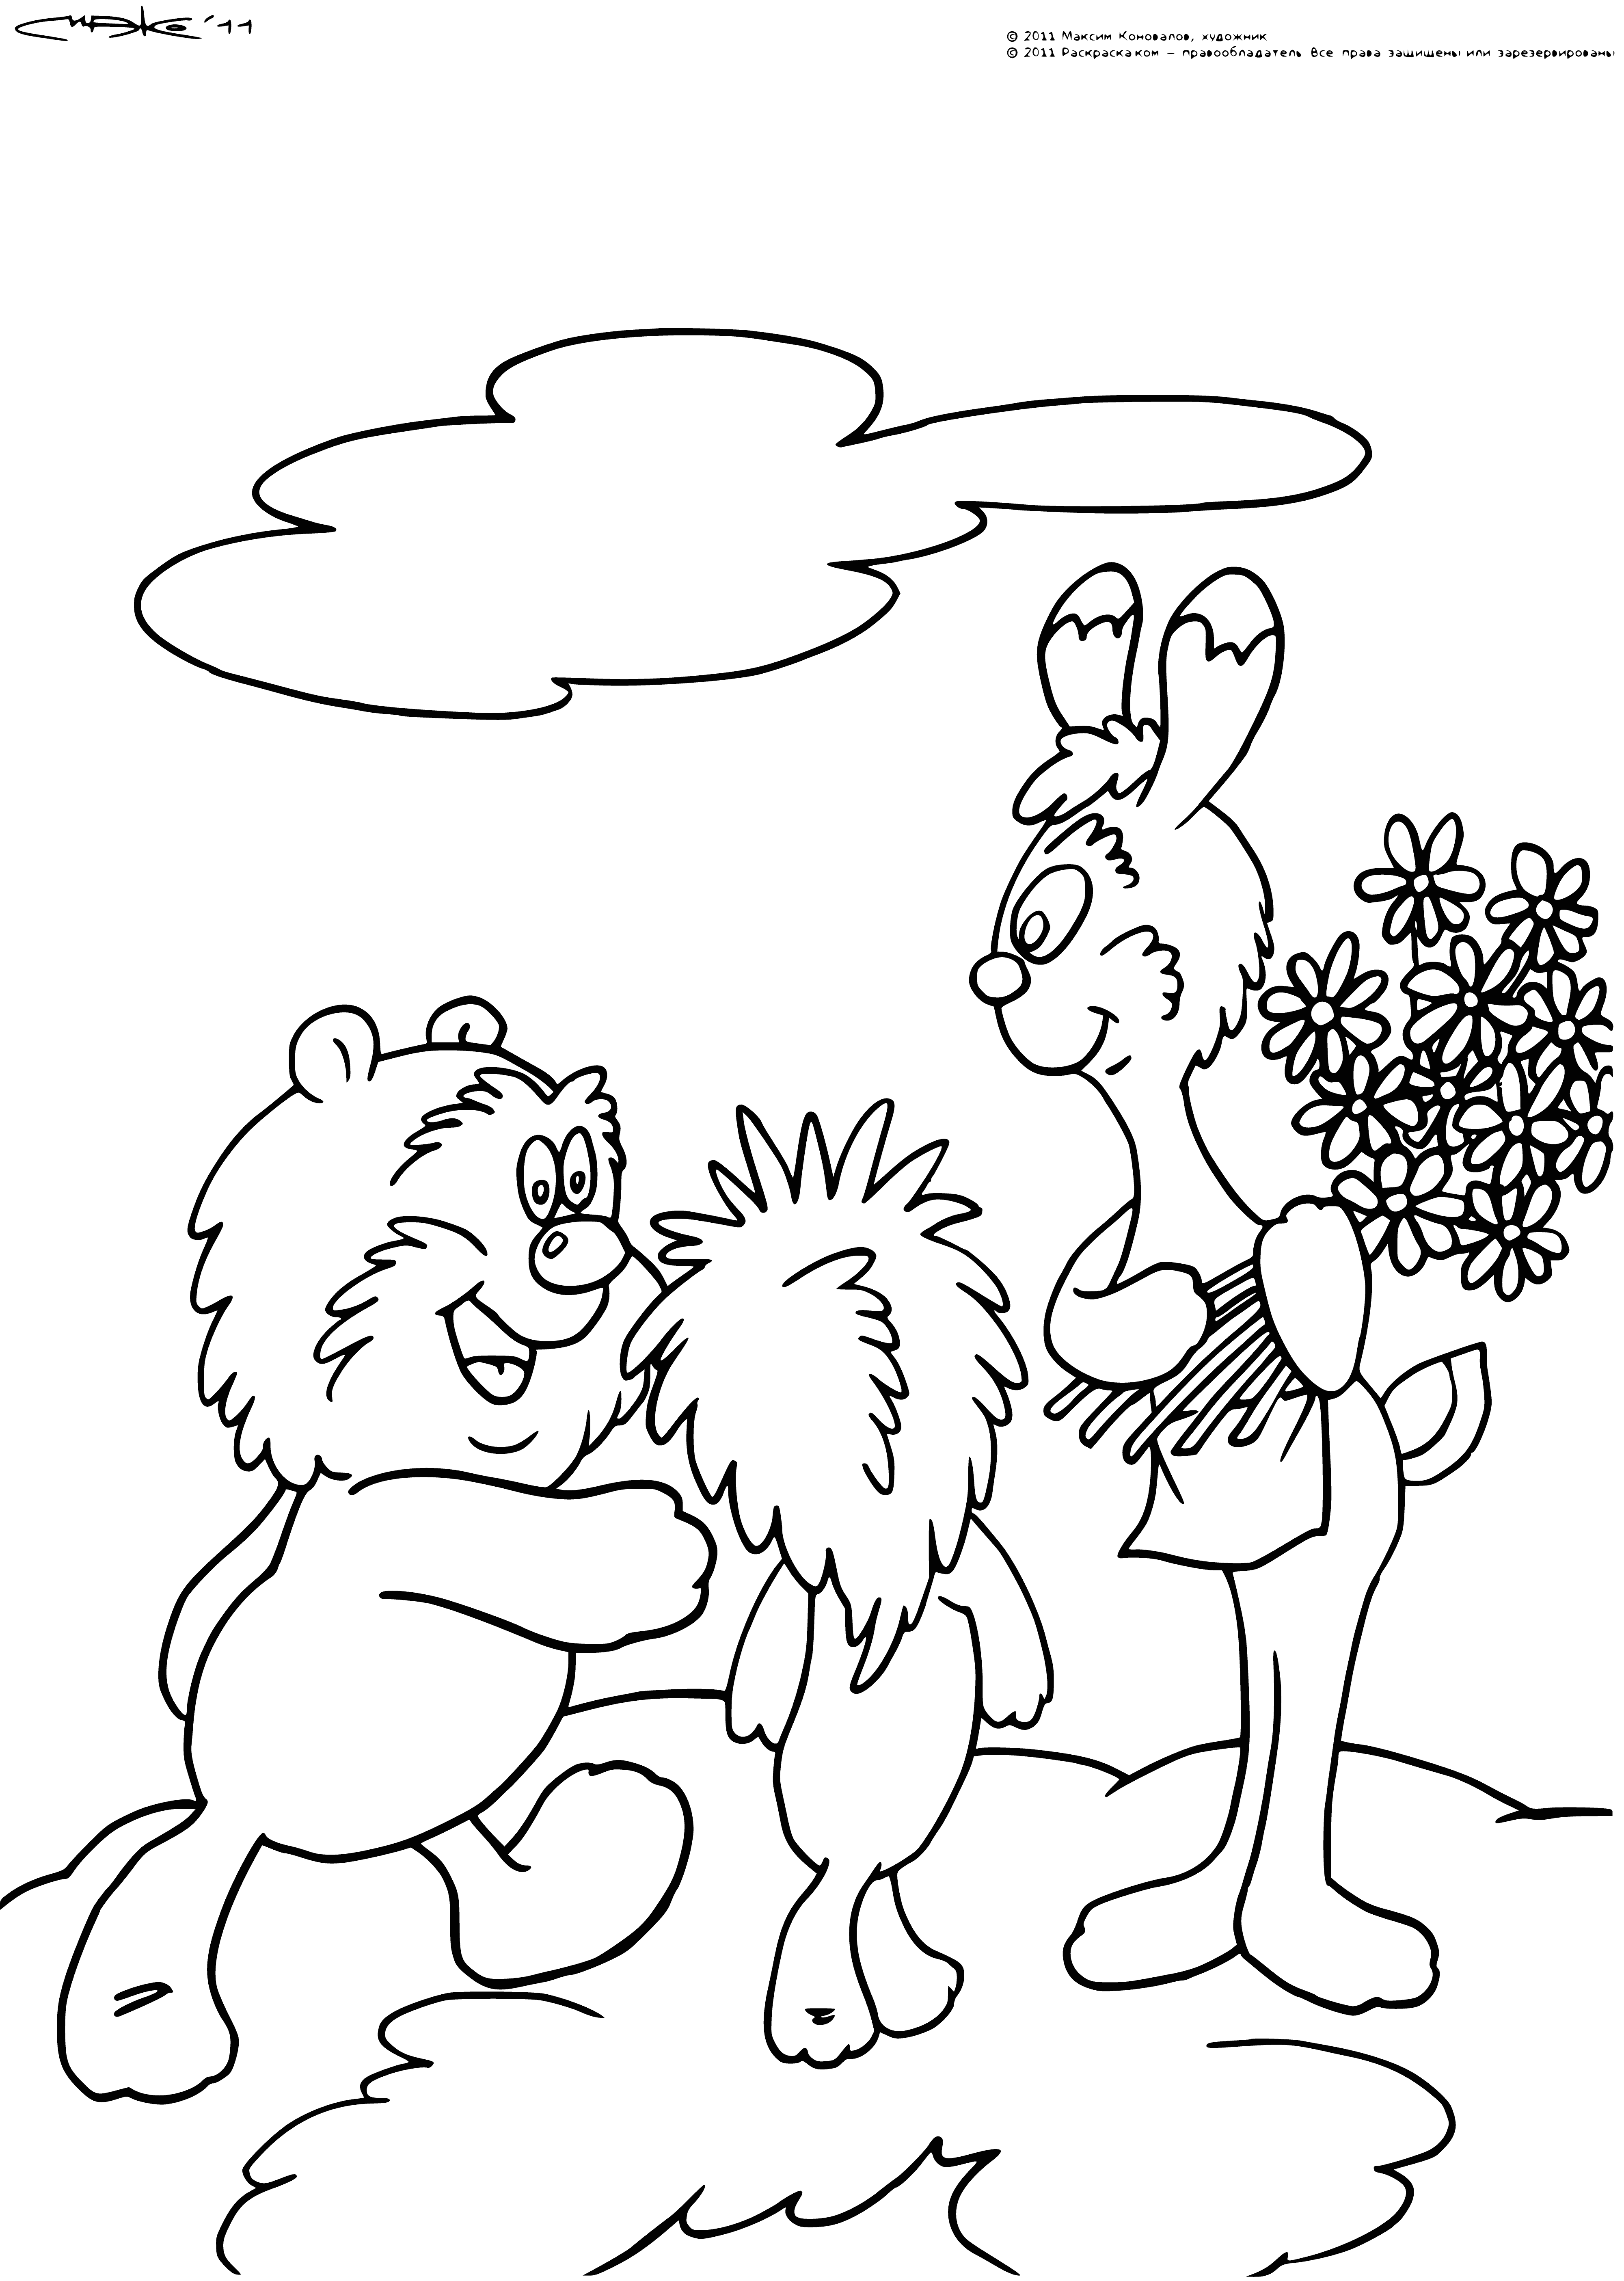 coloring page: 3 friends—beaming hedgehog w/ flower, carrot-holding rabbit, hug-happy bear—are all smiles in the coloring pic.